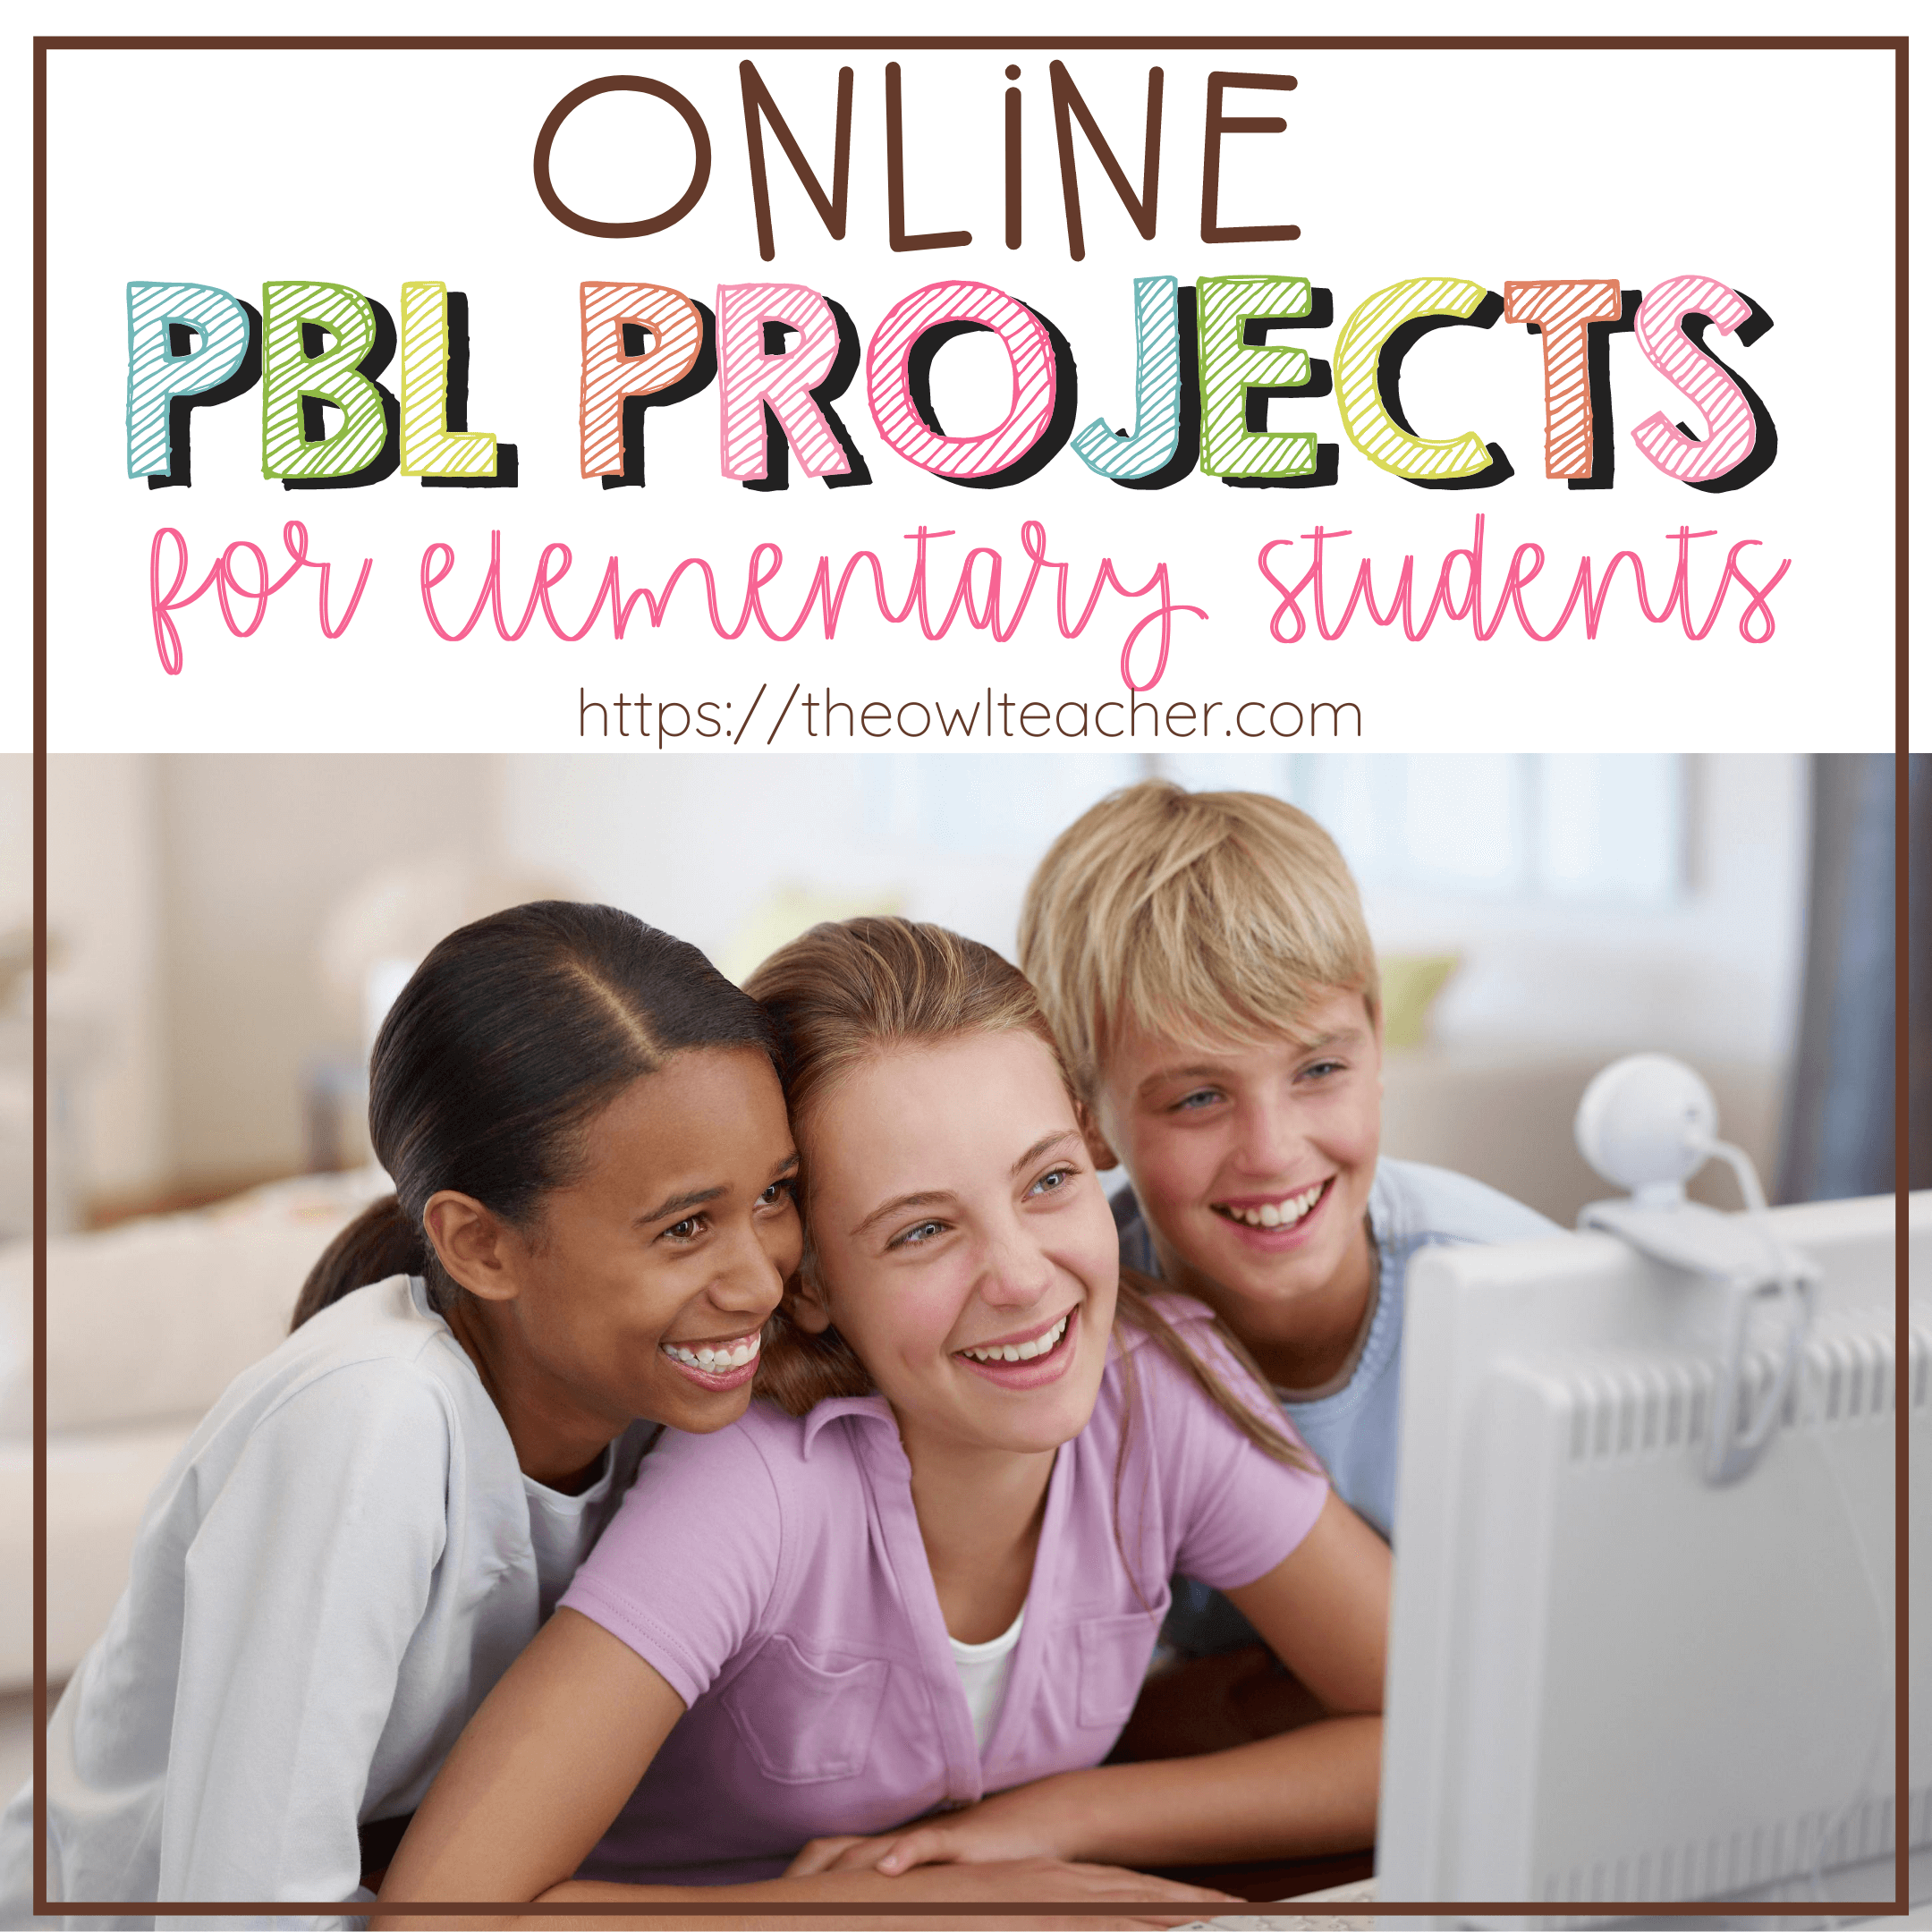 If you're teaching your students through distance learning this year, online PBL projects is a great option! Elementary students can practice critical thinking, independence, and so many other skills! Check out the resources in this post to get started!